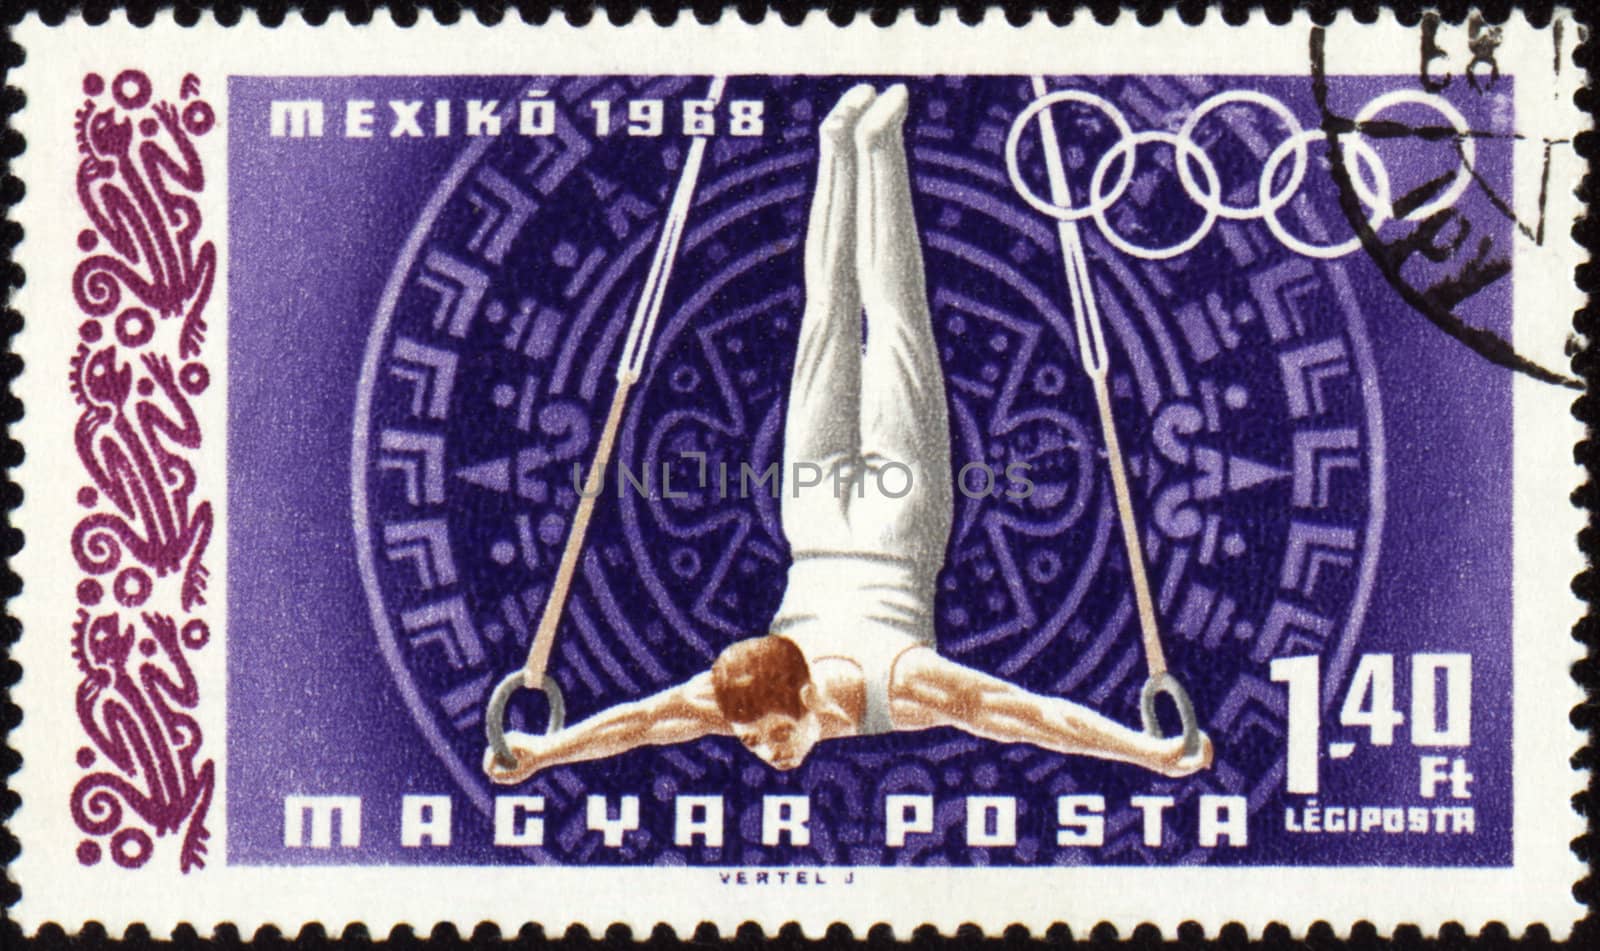 HUNGARY - CIRCA 1968: A post stamp printed in Hungary shows football, devoted to Olympic games in Mexico, series, circa 